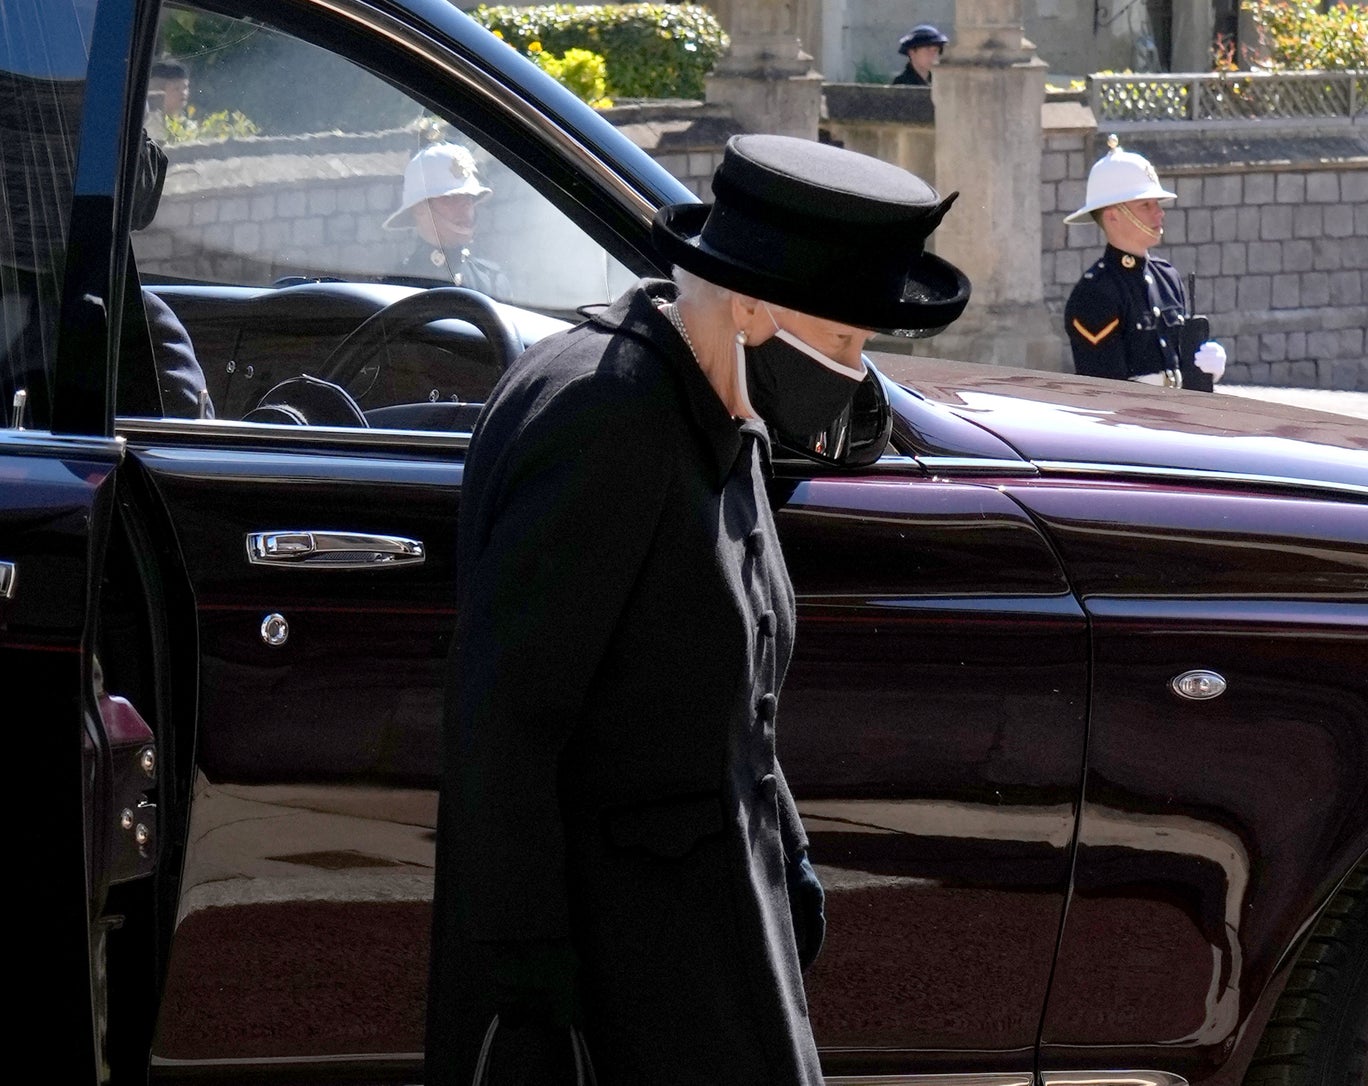 Prince Philip Funeral